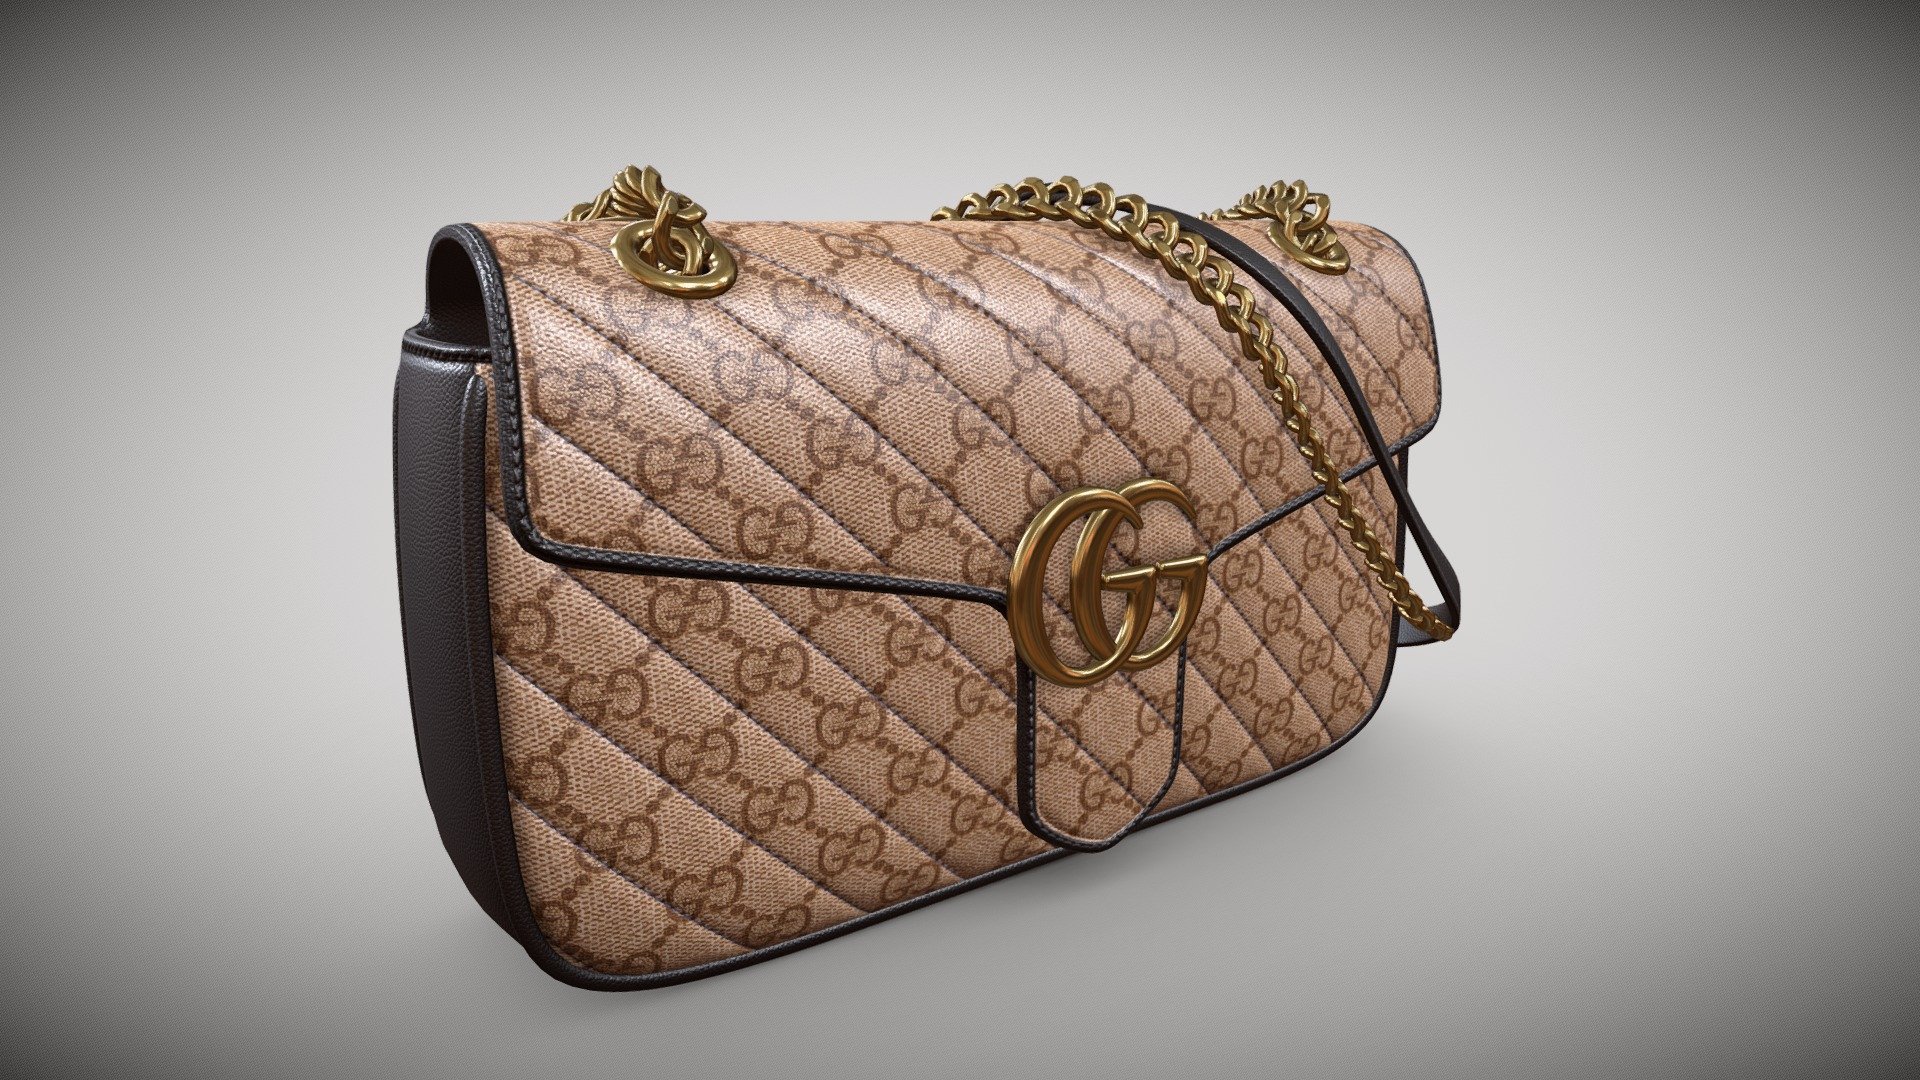 3D model Gucci GG Marmont Bag Beige Print VR / AR / low-poly